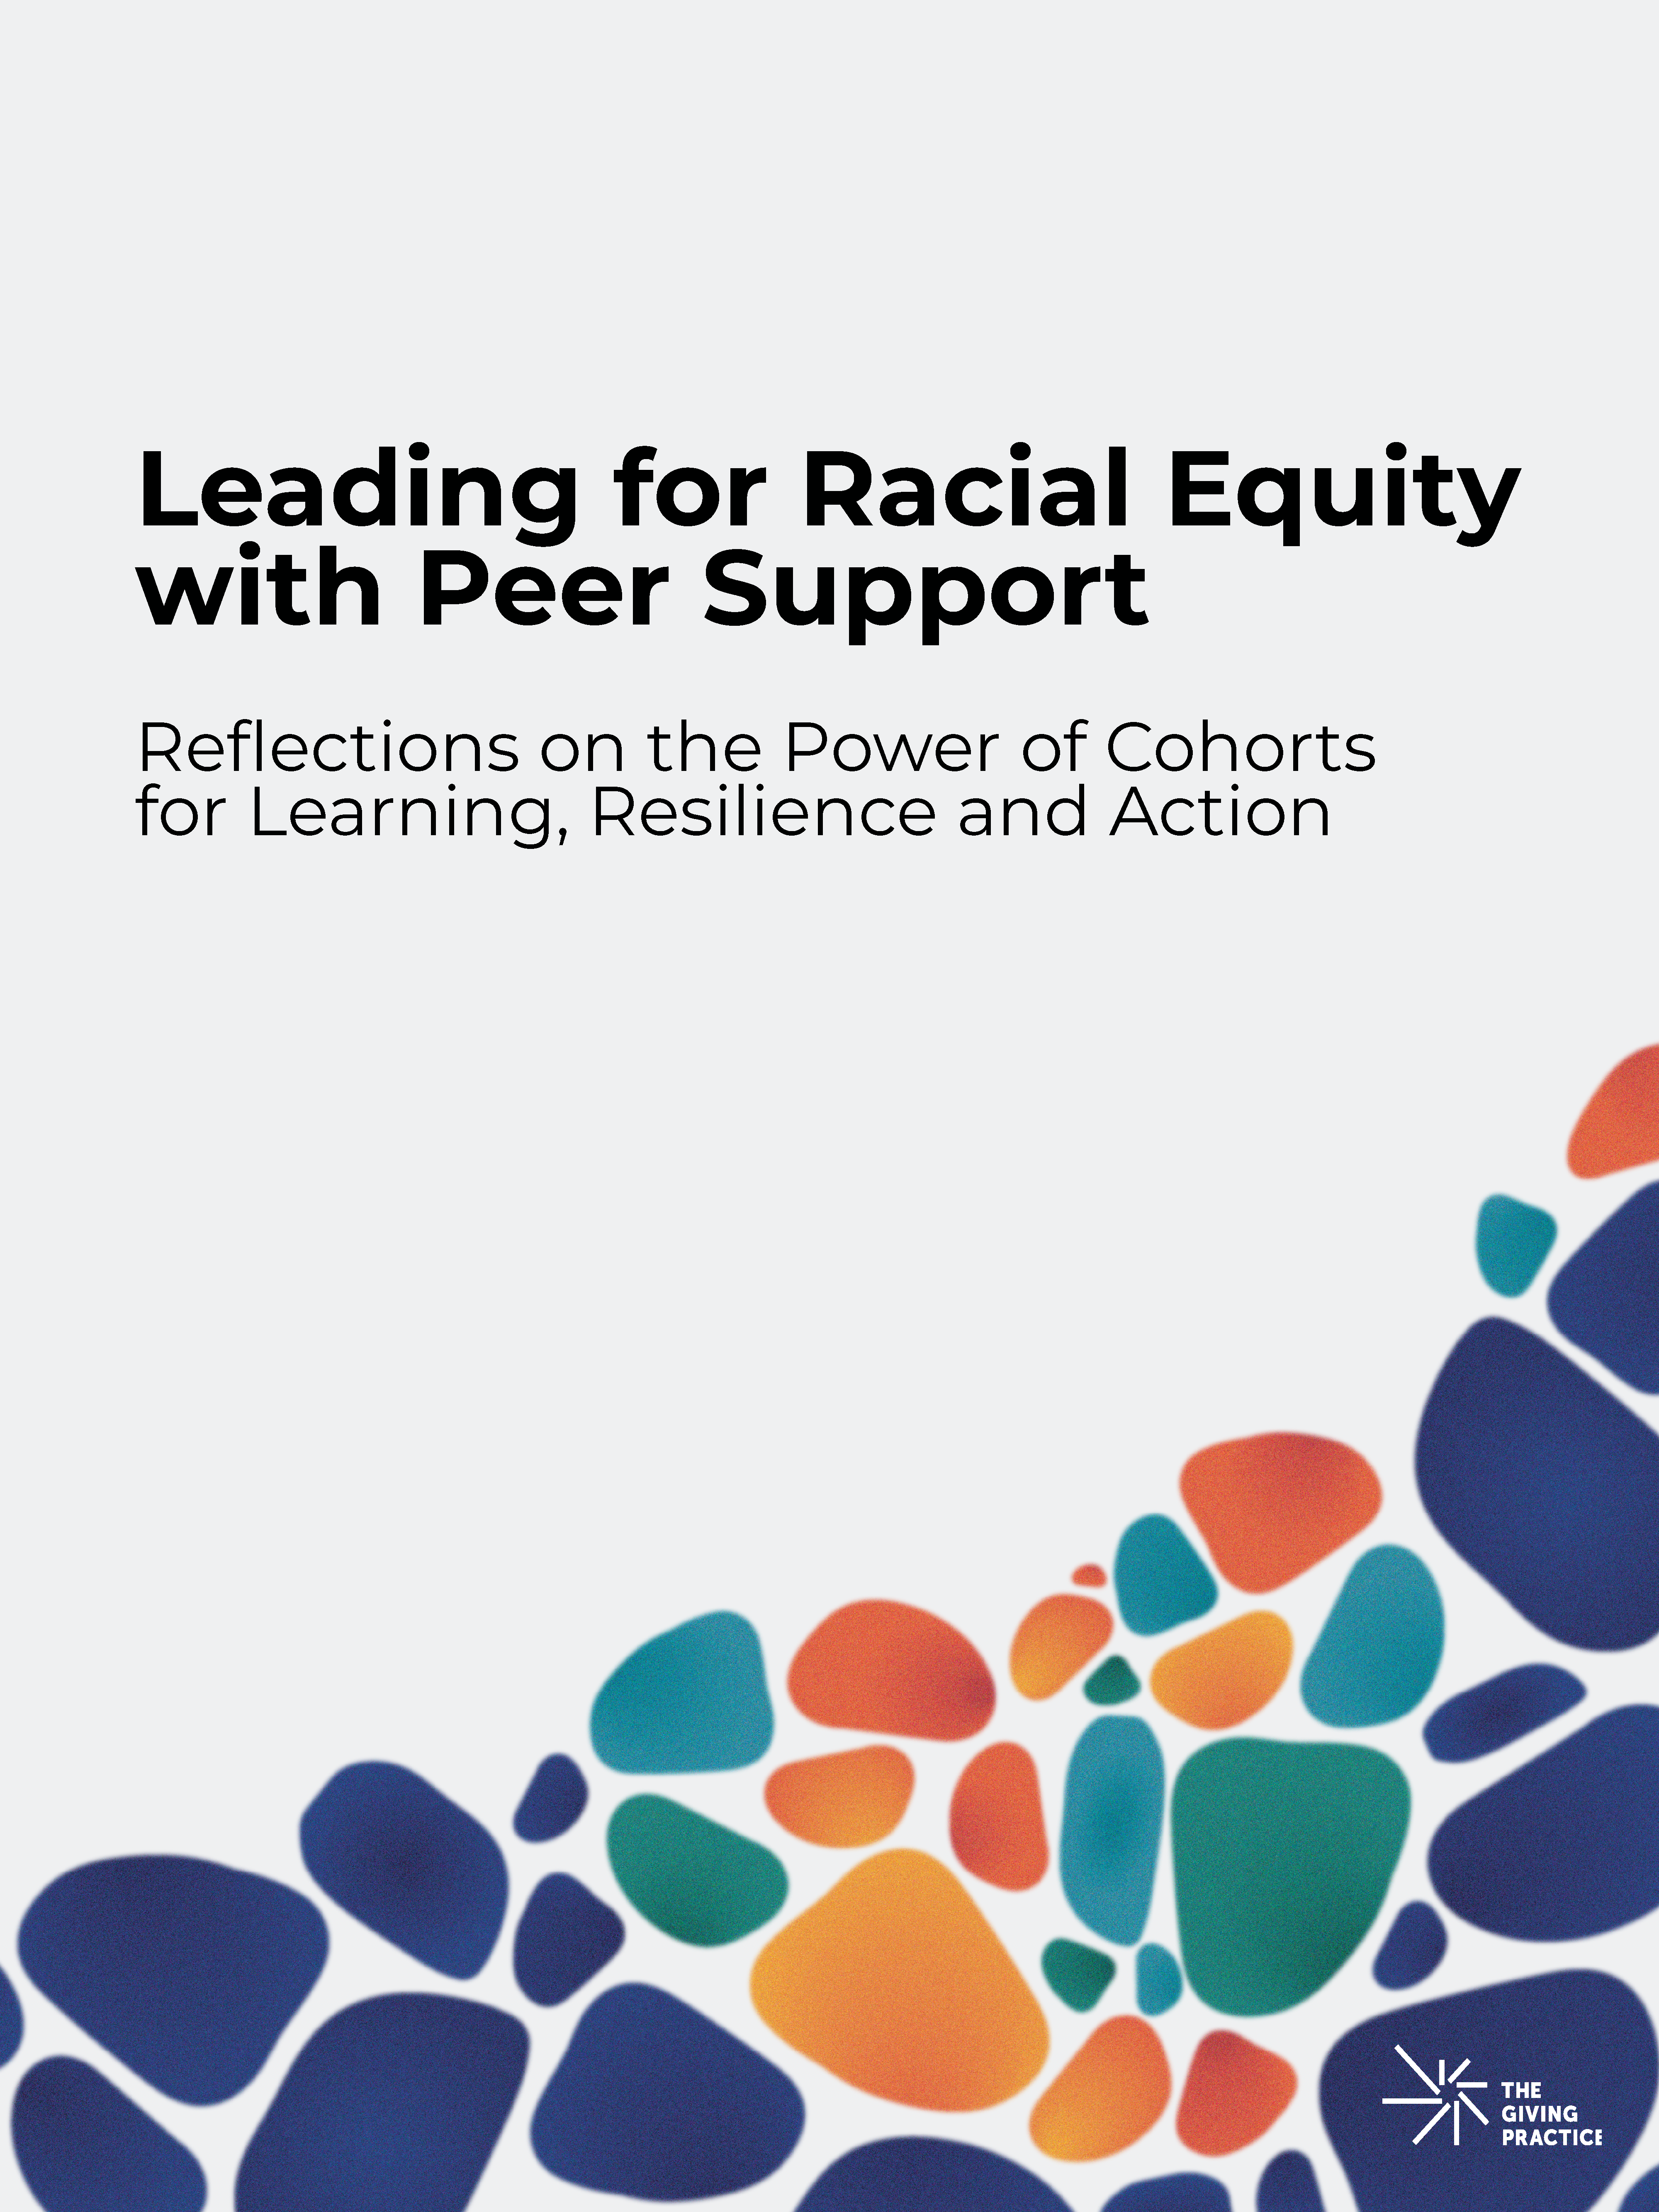 New Report: Leading for Racial Equity with Peer Support